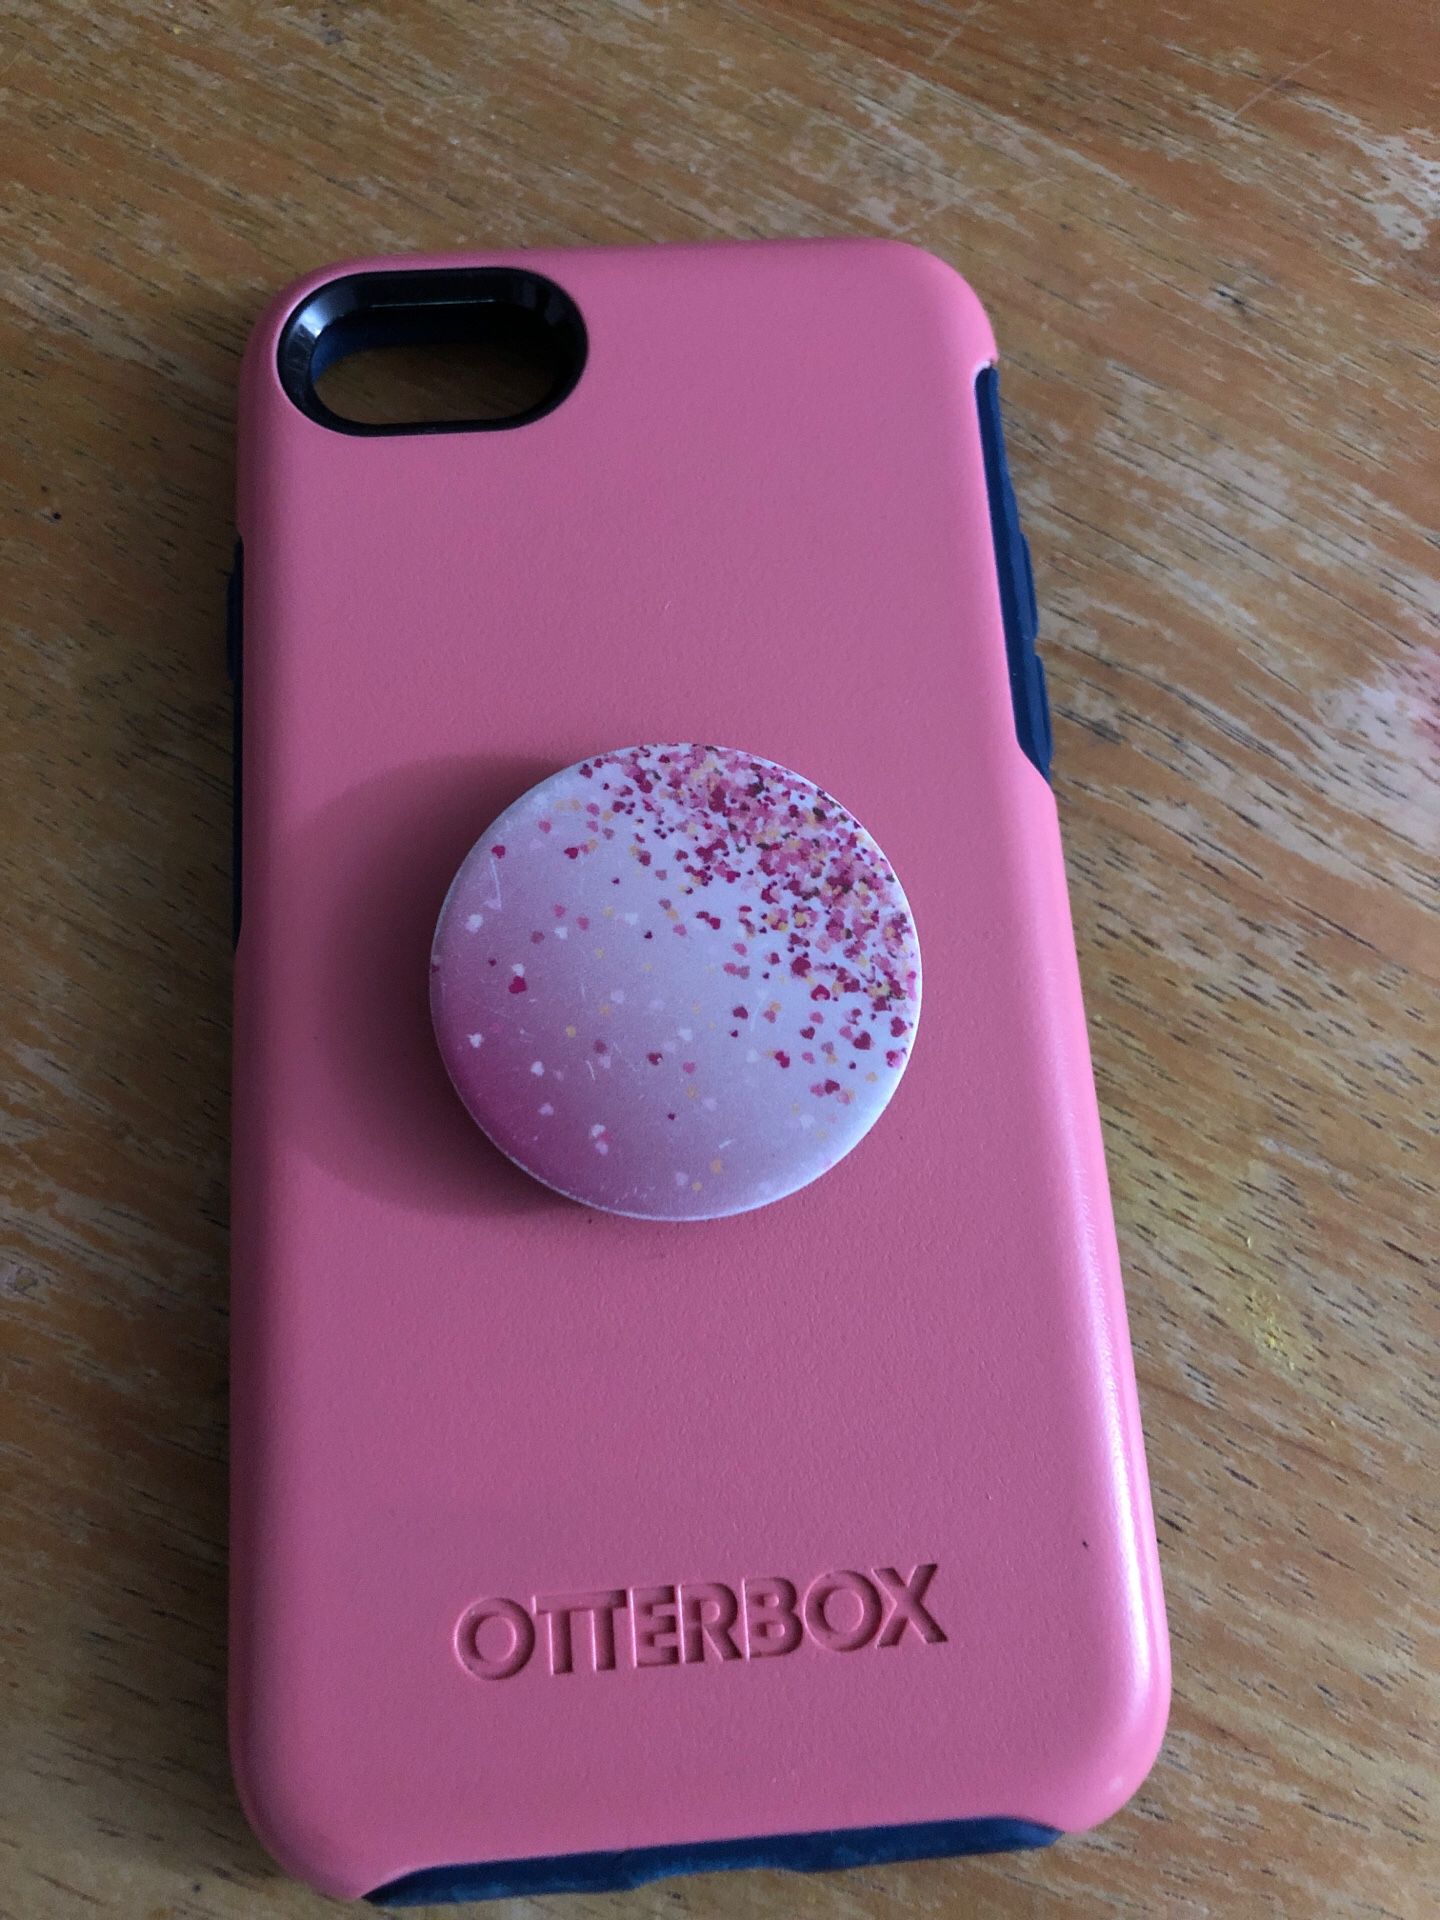 iPhone 5/6 case with pop socket otterbox